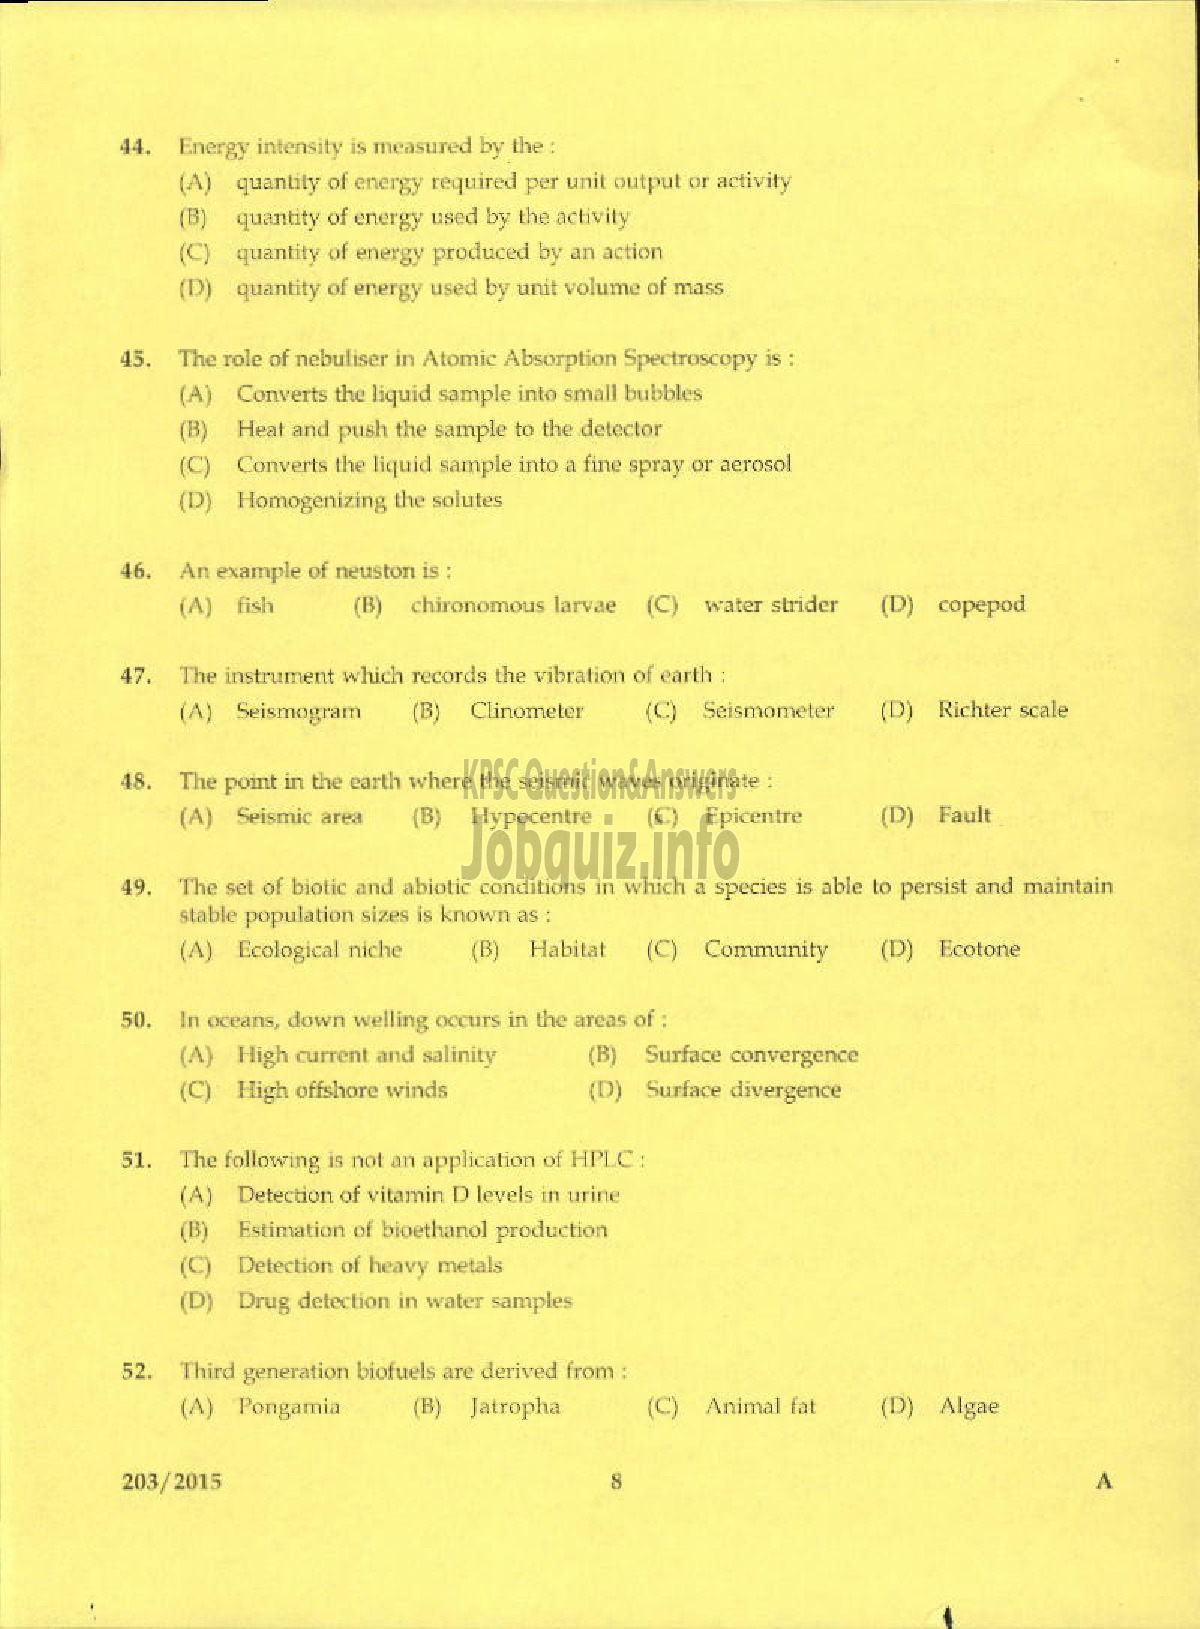 Kerala PSC Question Paper - ASSISTANT ENVIRONMENTAL OFFICER ENVIRONMENT AND CLIMATE CHANGE-6